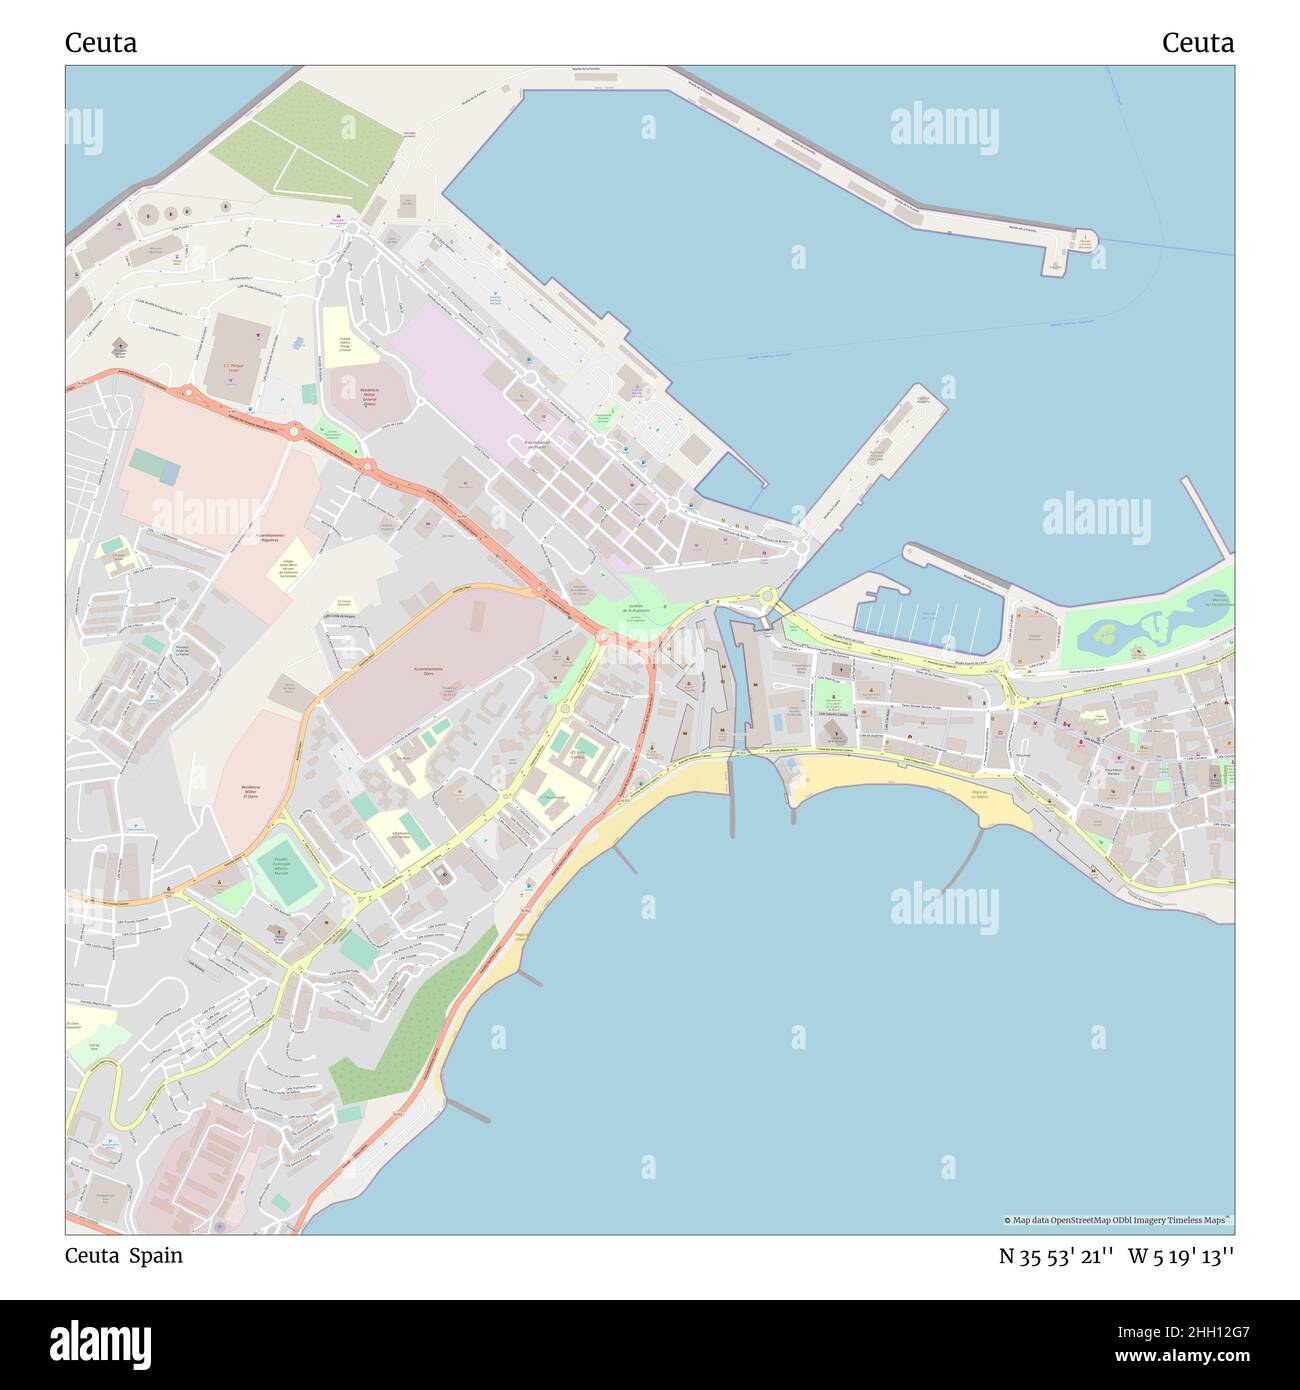 Ceuta, Ceuta, Spain, Ceuta, N 35 53' 21'', W 5 19' 13'', map, Timeless Map published in 2021. Travelers, explorers and adventurers like Florence Nightingale, David Livingstone, Ernest Shackleton, Lewis and Clark and Sherlock Holmes relied on maps to plan travels to the world's most remote corners, Timeless Maps is mapping most locations on the globe, showing the achievement of great dreams Stock Photo